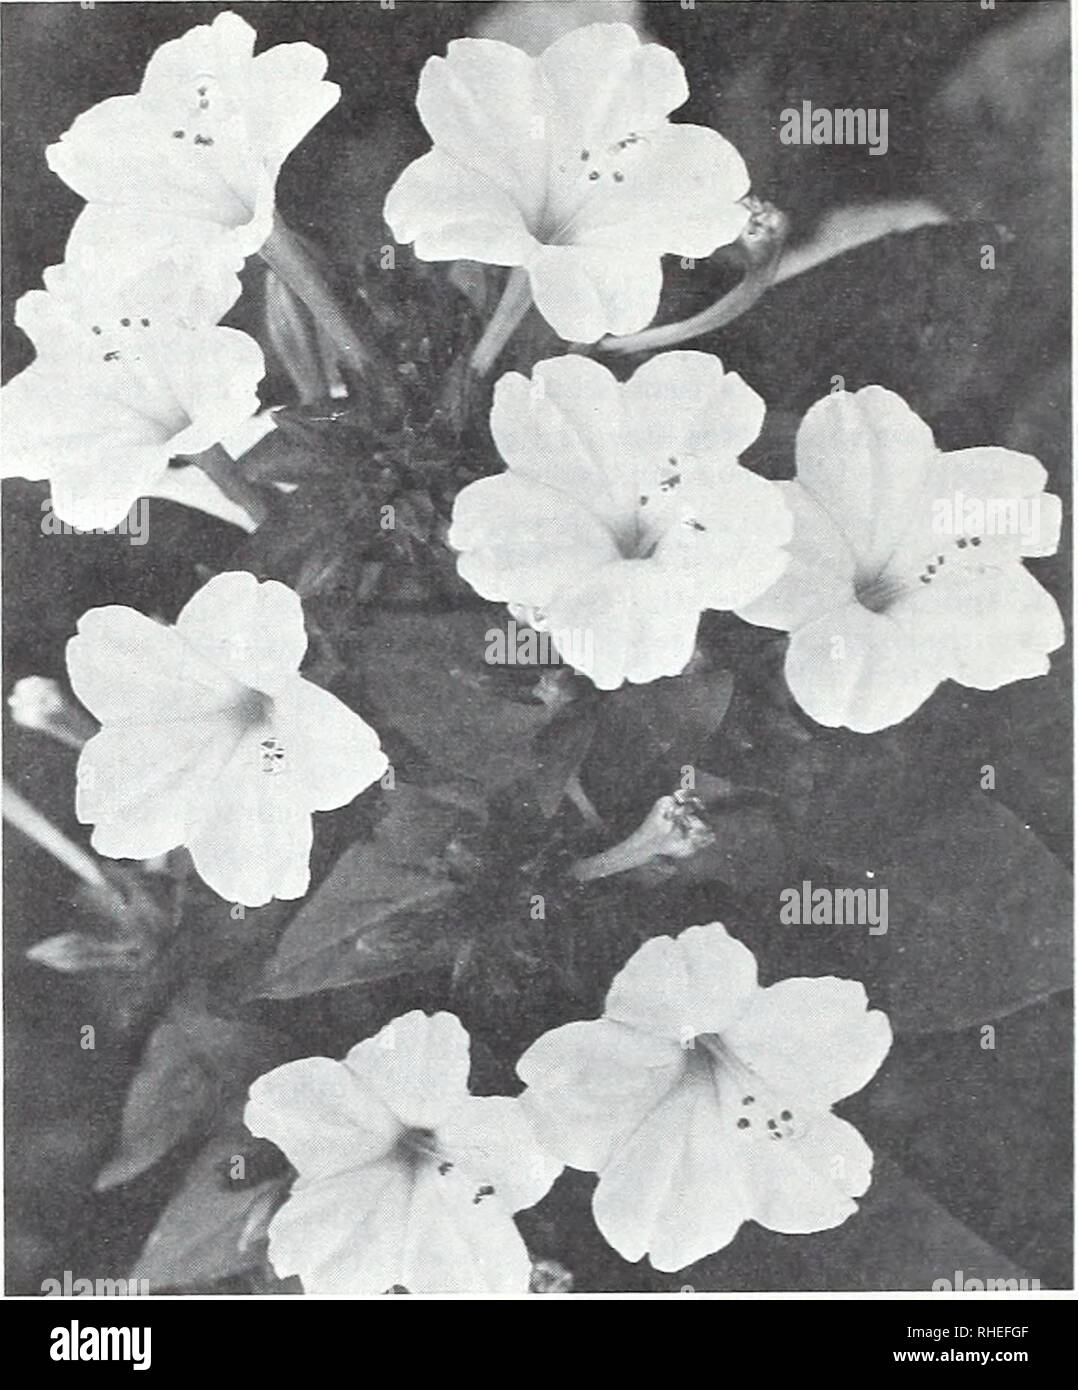 . Bolgiano's spring 1971. Nurseries (Horticulture) Catalogs; Bulbs (Plants) Catalogs; Seeds Catalogs; Vegetables Catalogs; Gardening Equipment and supplies Catalogs. 687. Double Gloriosa Daisy. Pkt. 50c. 756. Four o'Clock. Pkt. 25c. Four o'clock (Marvel of Peru) A. 756. Mixed Colors. Bushy plants to 2}^ feet with myriads of red, yellow or white flowers opening at about 4 P.M. Pkt. 25c. Foxglove (Digitalis) b. 727. Excelsior Hybrids. Giant-flowered mixture with nearly horizontal florets. Pkt. 25c. /^^t 770. Foxy. All-America Selection for 1967. Blooms first ^) season. Full color range. 2]4 to Stock Photo